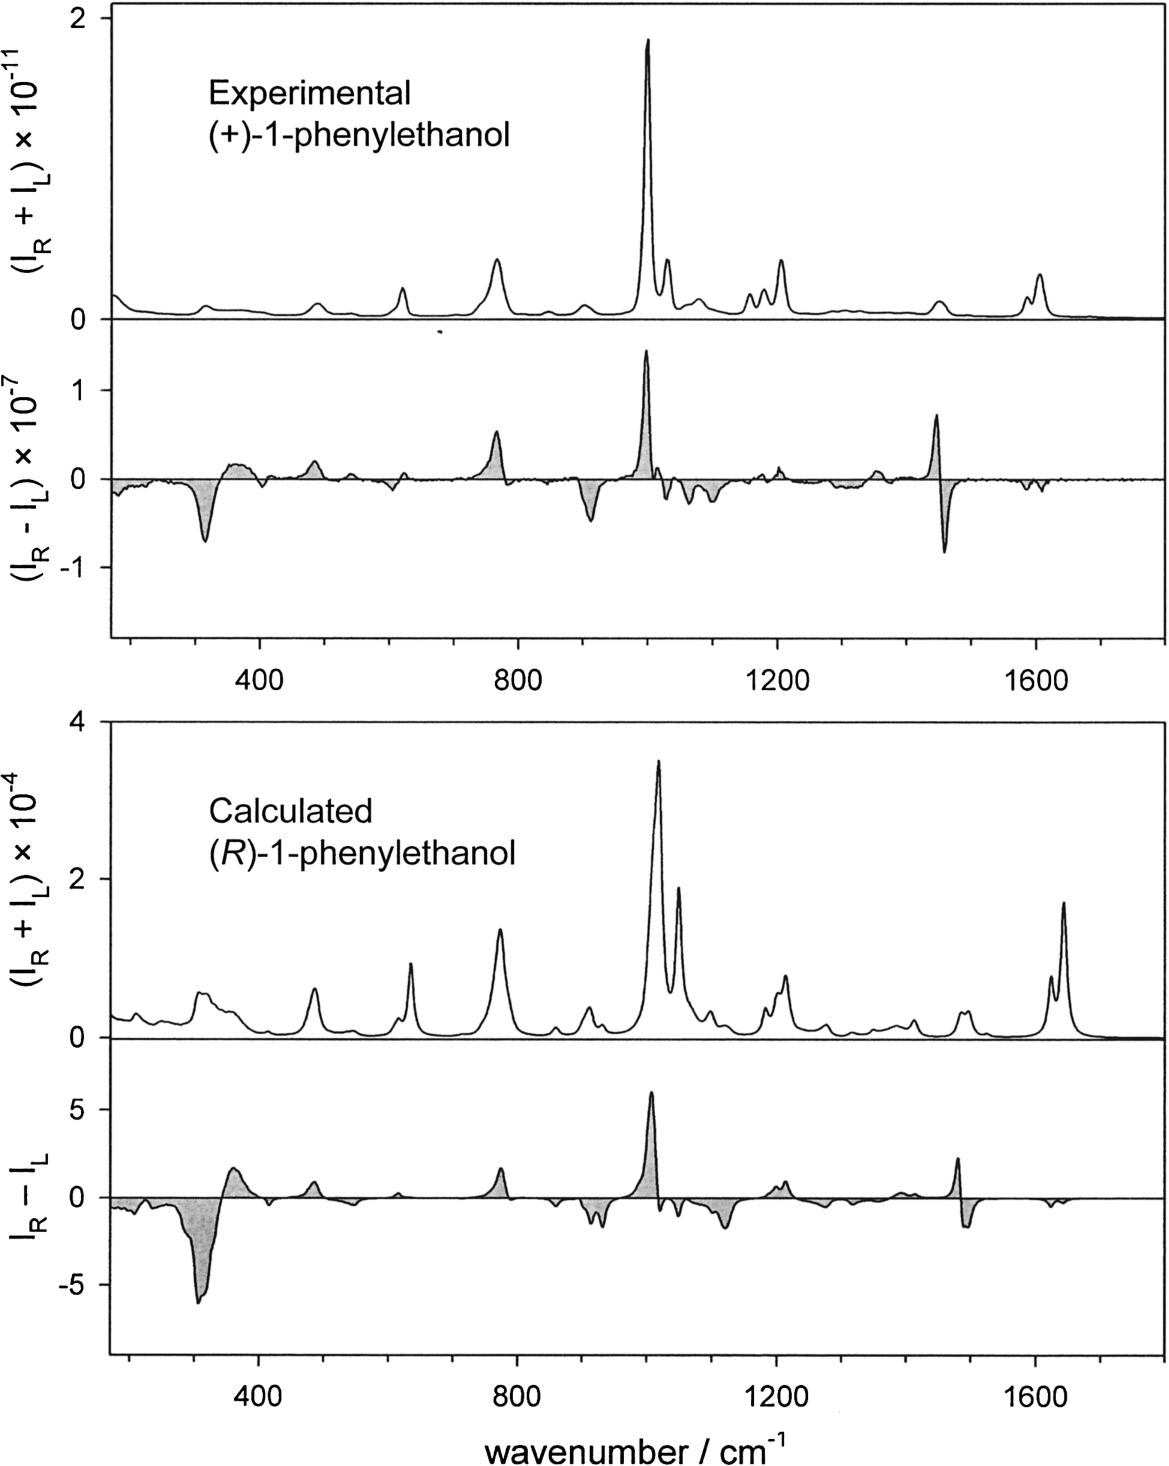 Experimental and calculated backscattered SCP Raman and ROA spectra of (+)-(R)-1-phenylethanol (adapted from [69]). The absolute intensities are arbitrary, but the dimensionless ratios (IR−IL)/(IR+IL) are meaningful and may be compared between experimental and simulated spectra.